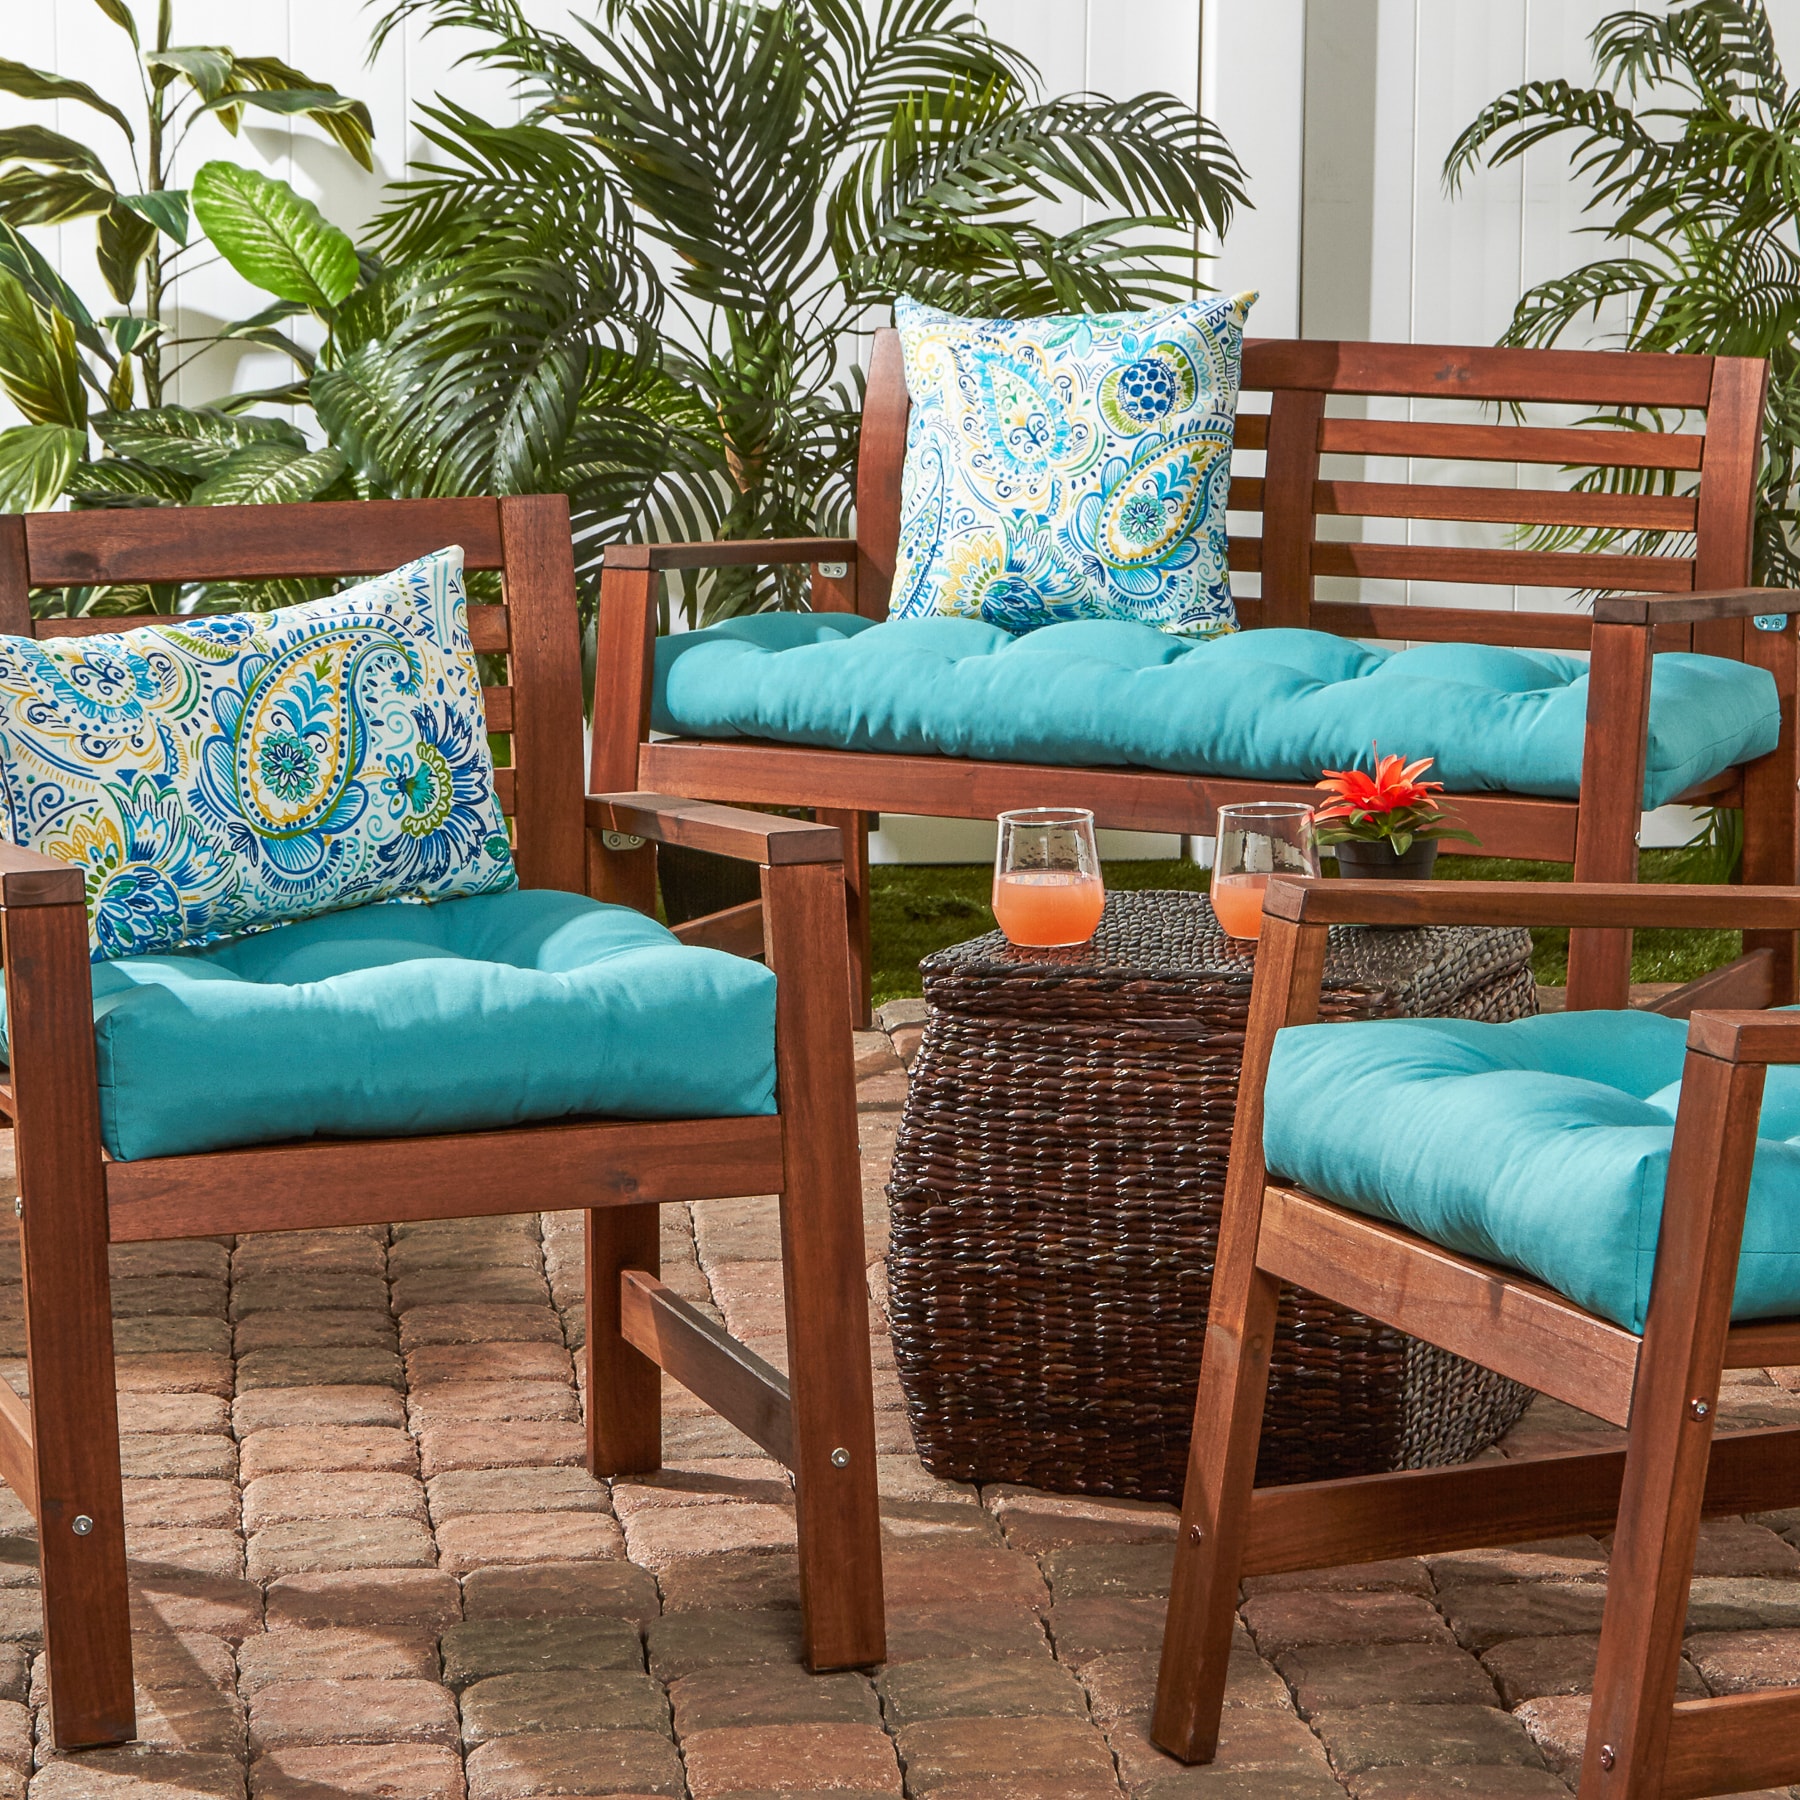 Greendale Home Fashions 51 in. Outdoor Bench Cushion Marine Blue